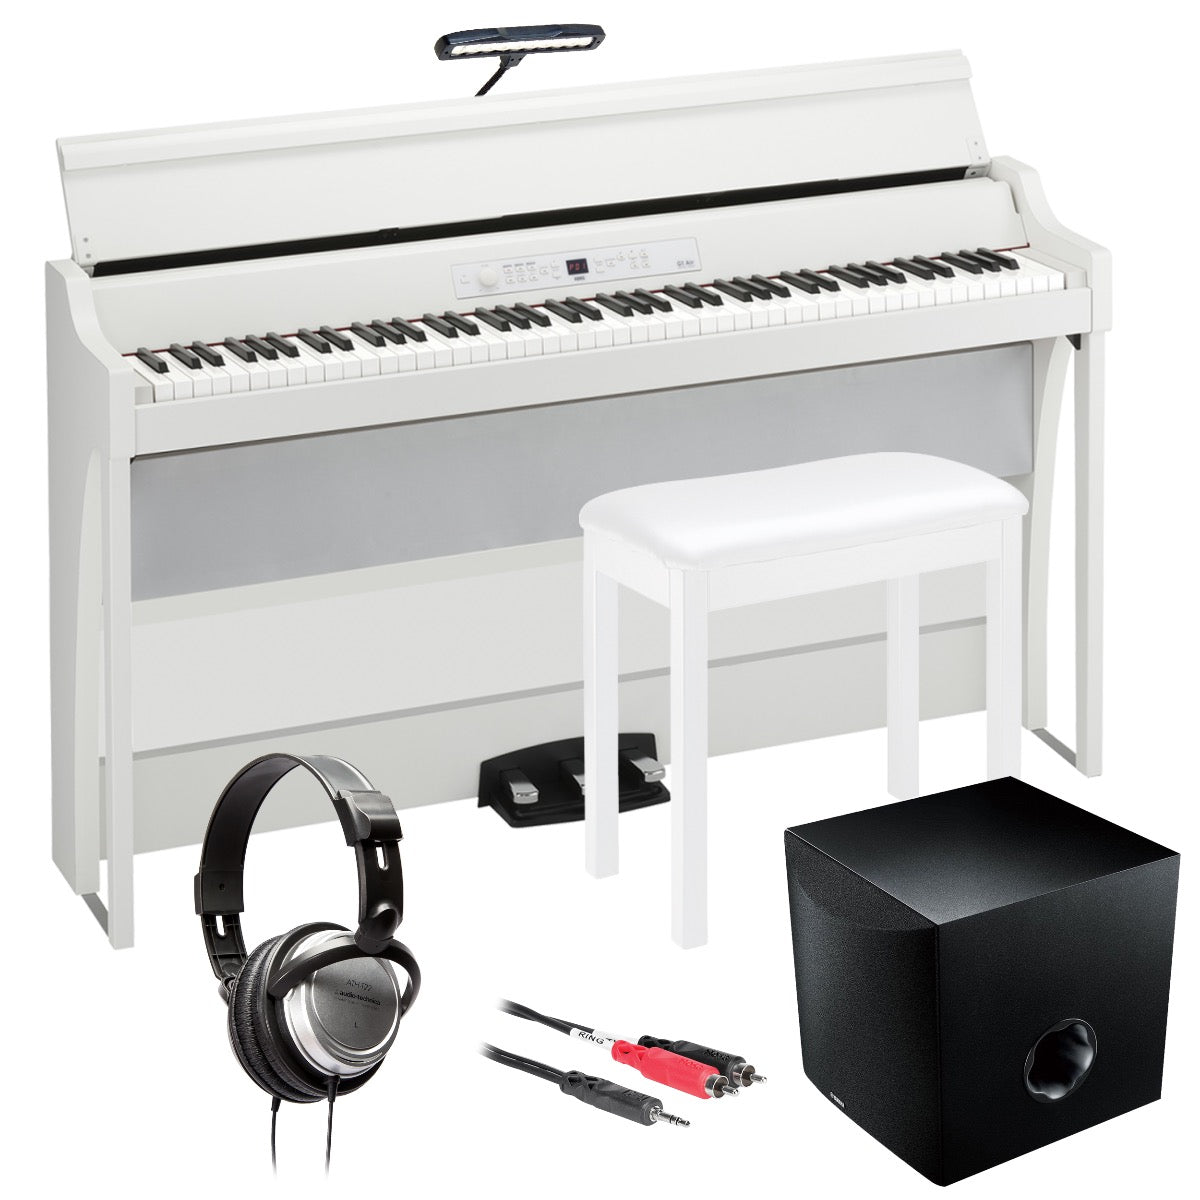 Image of the piano with the bundled accessories